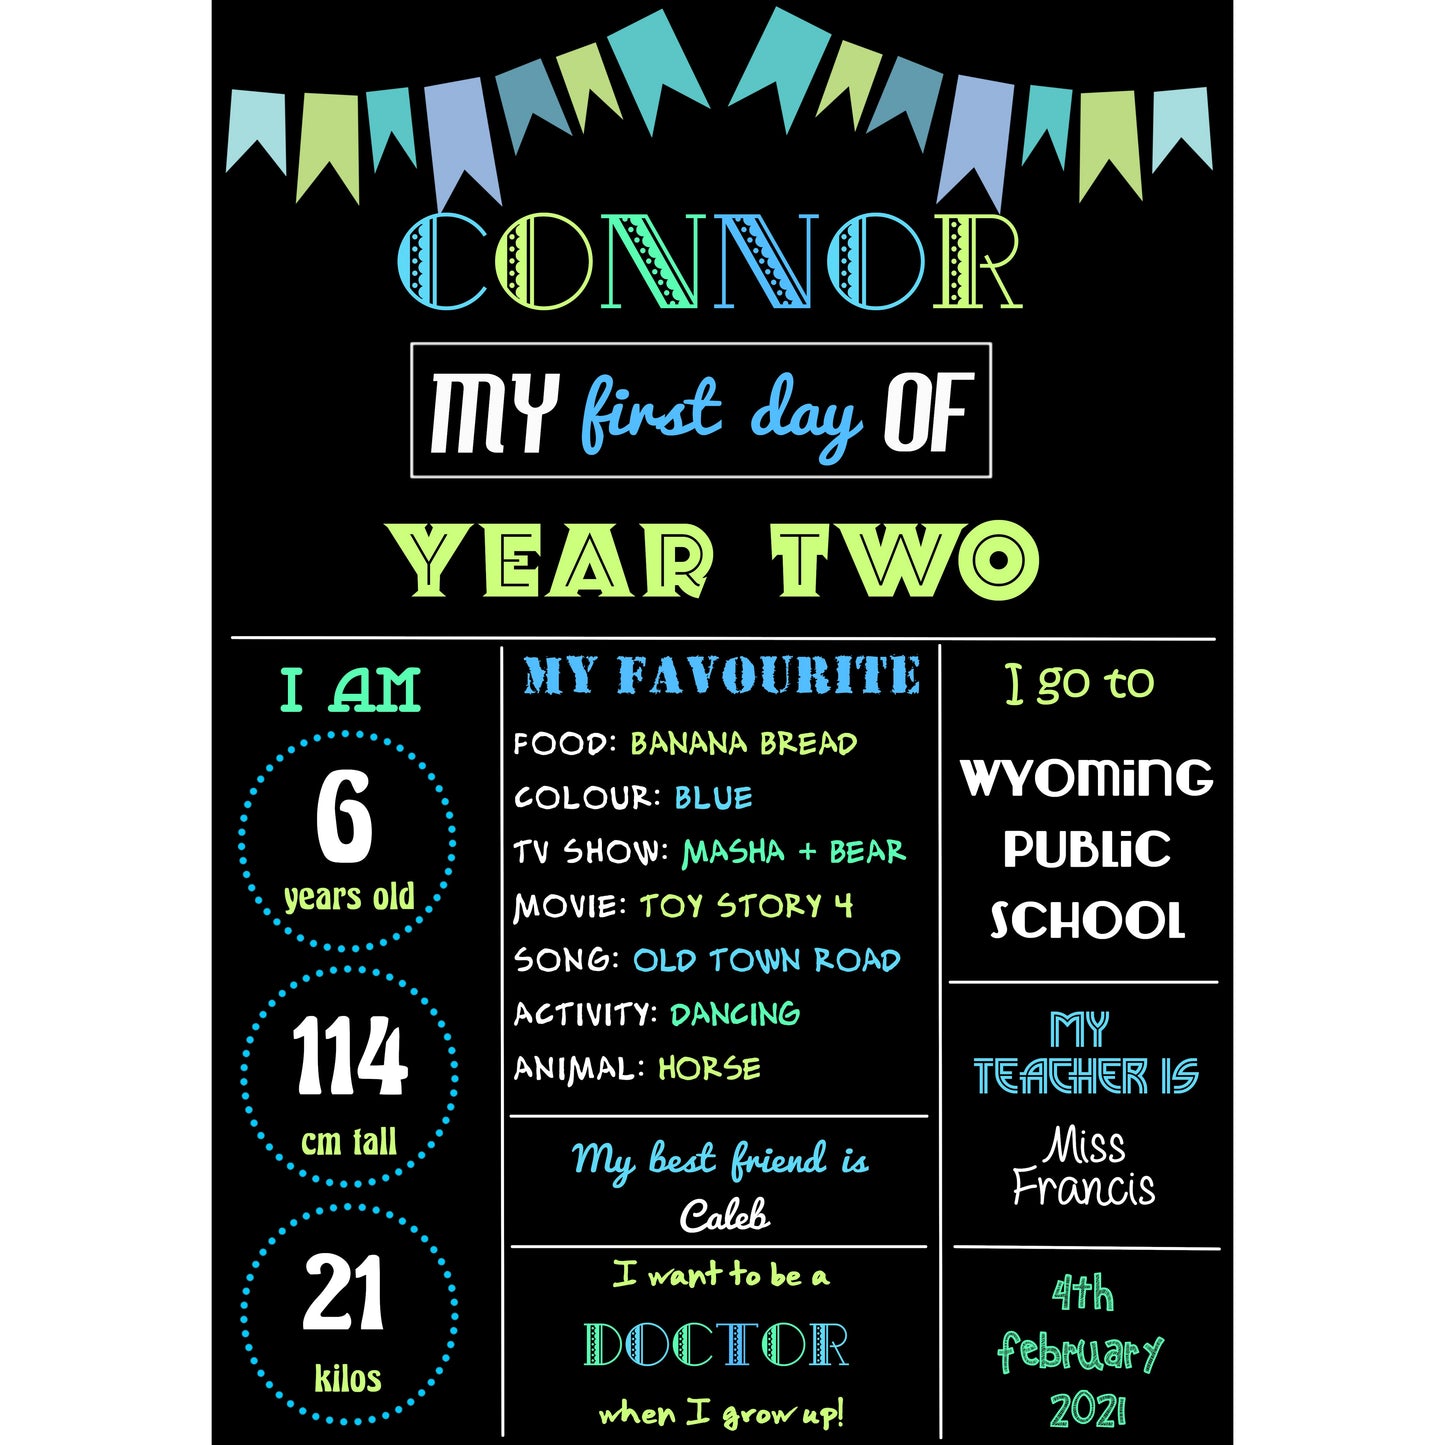 First Day of School poster - CONNOR THEME